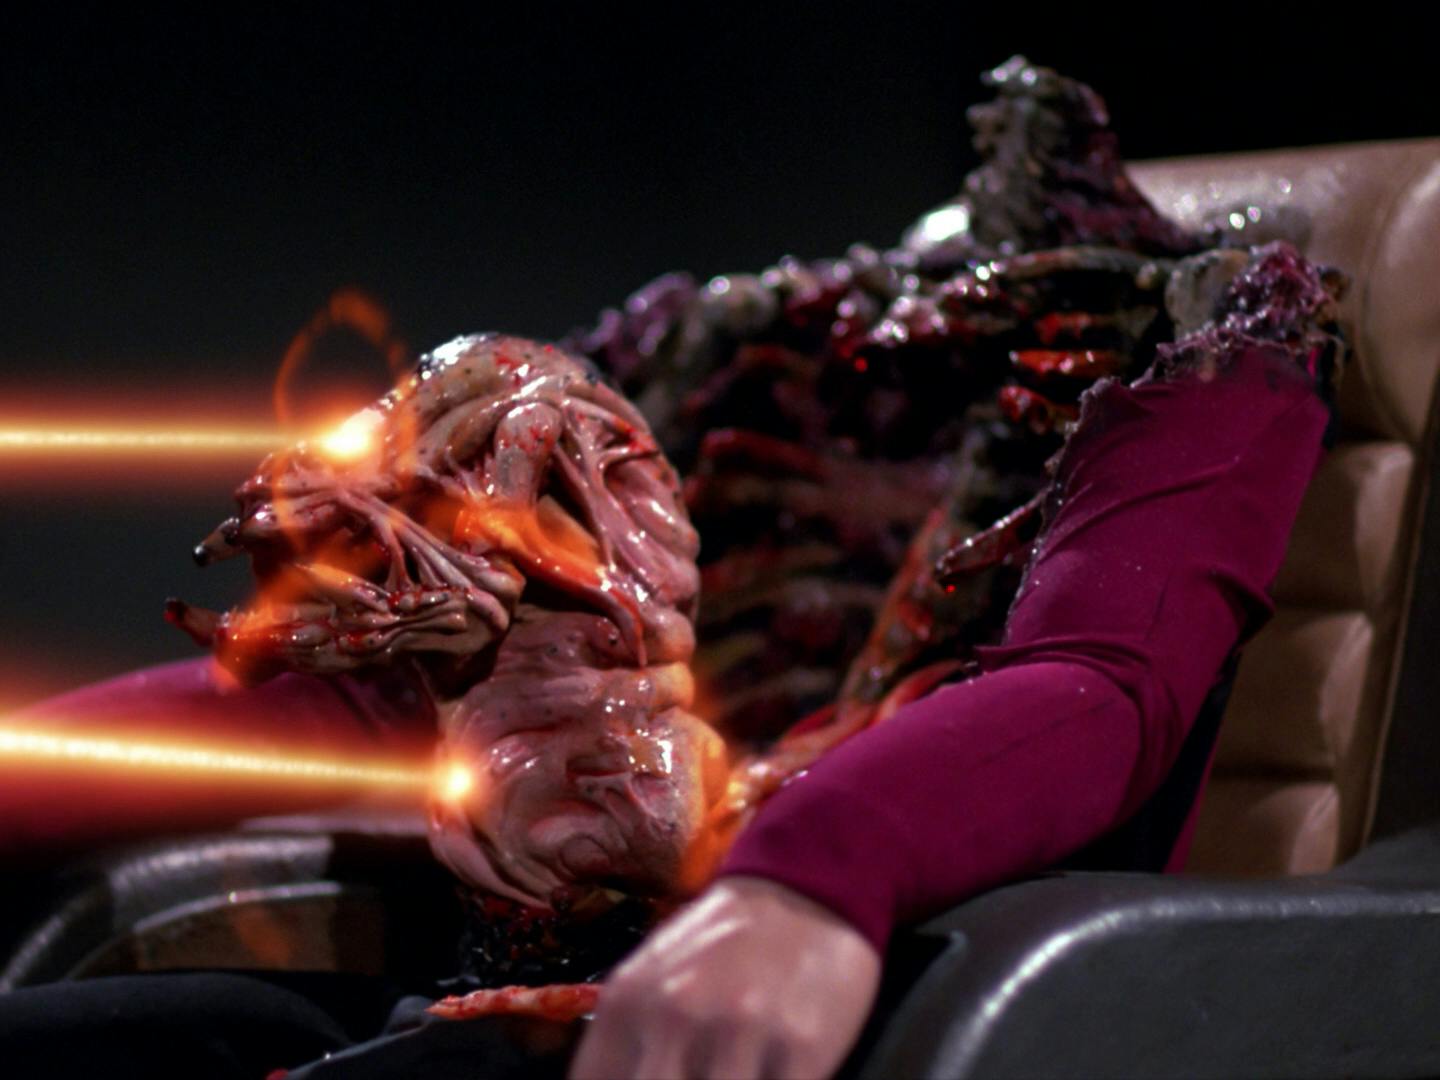 Parasitic aliens infiltrate Starfleet with the mother parasite dissolving an officer's chest cavity, lurching out screaming at Riker and Picard in 'Conspiracy'